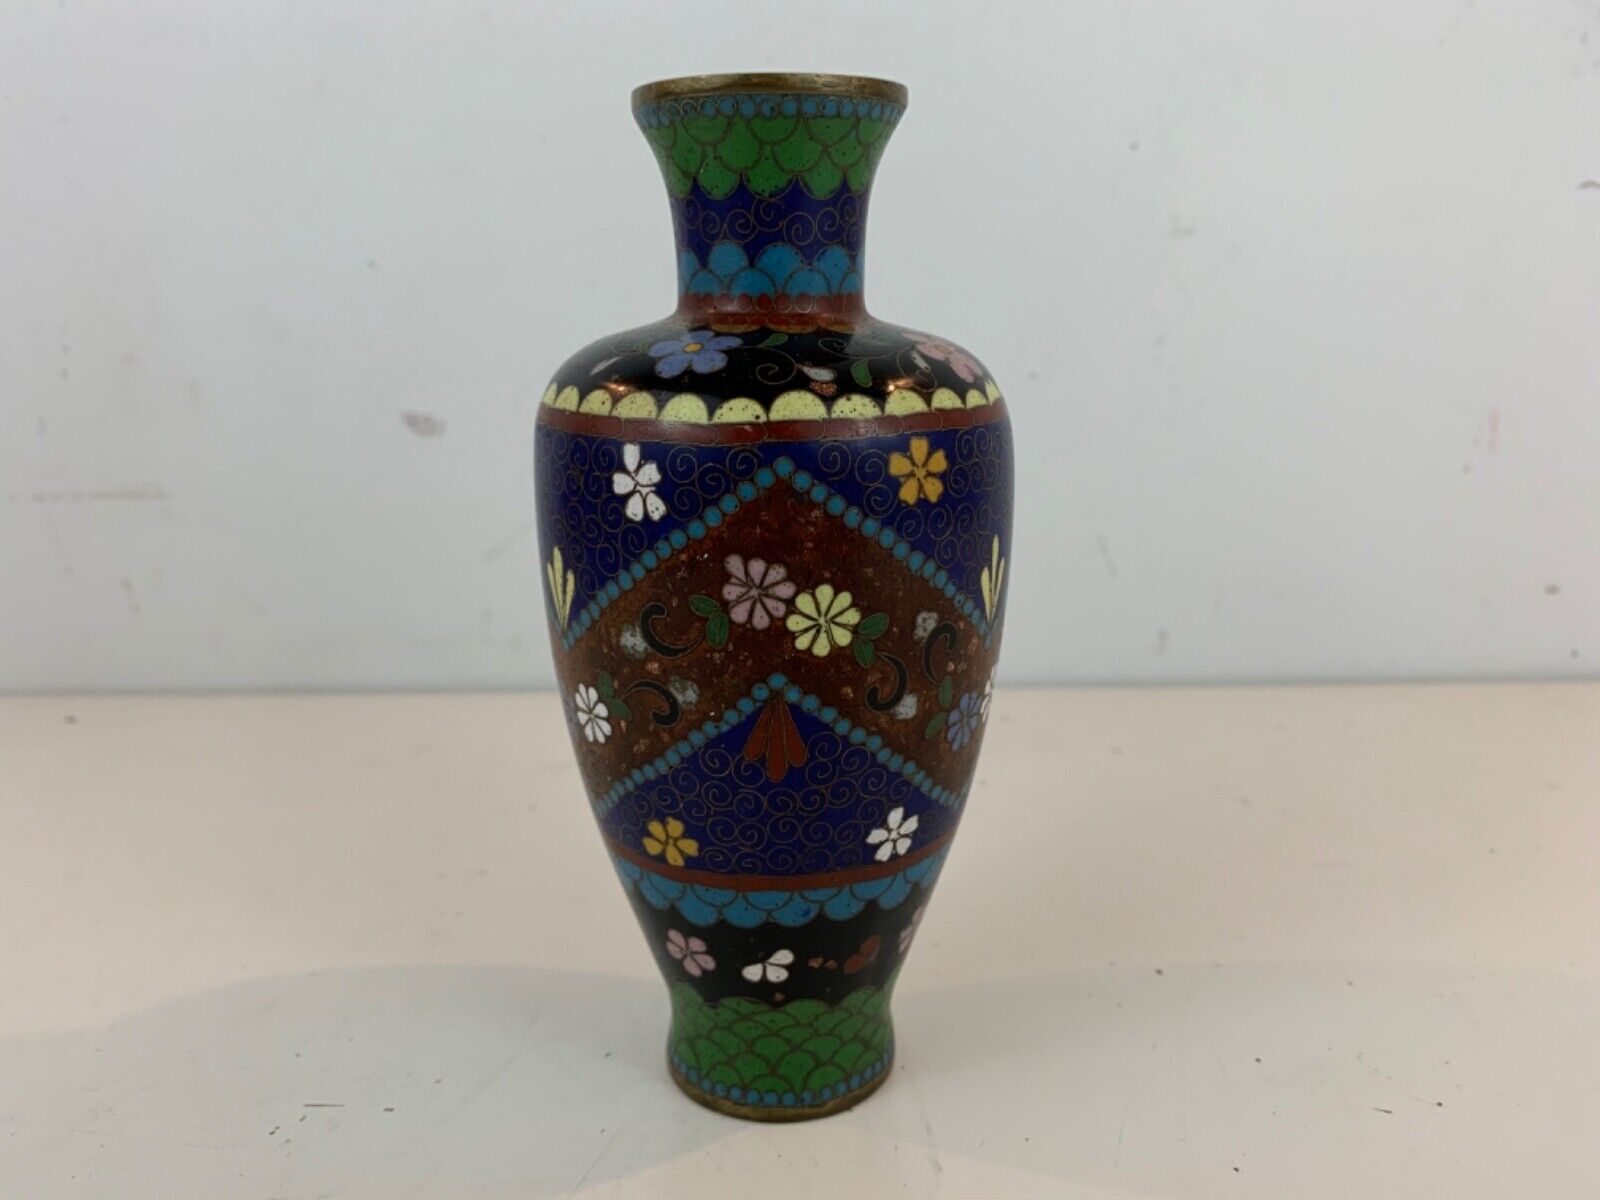 Antique Chinese / Japanese Cloisonné and Goldstone Vase with Floral Decorations